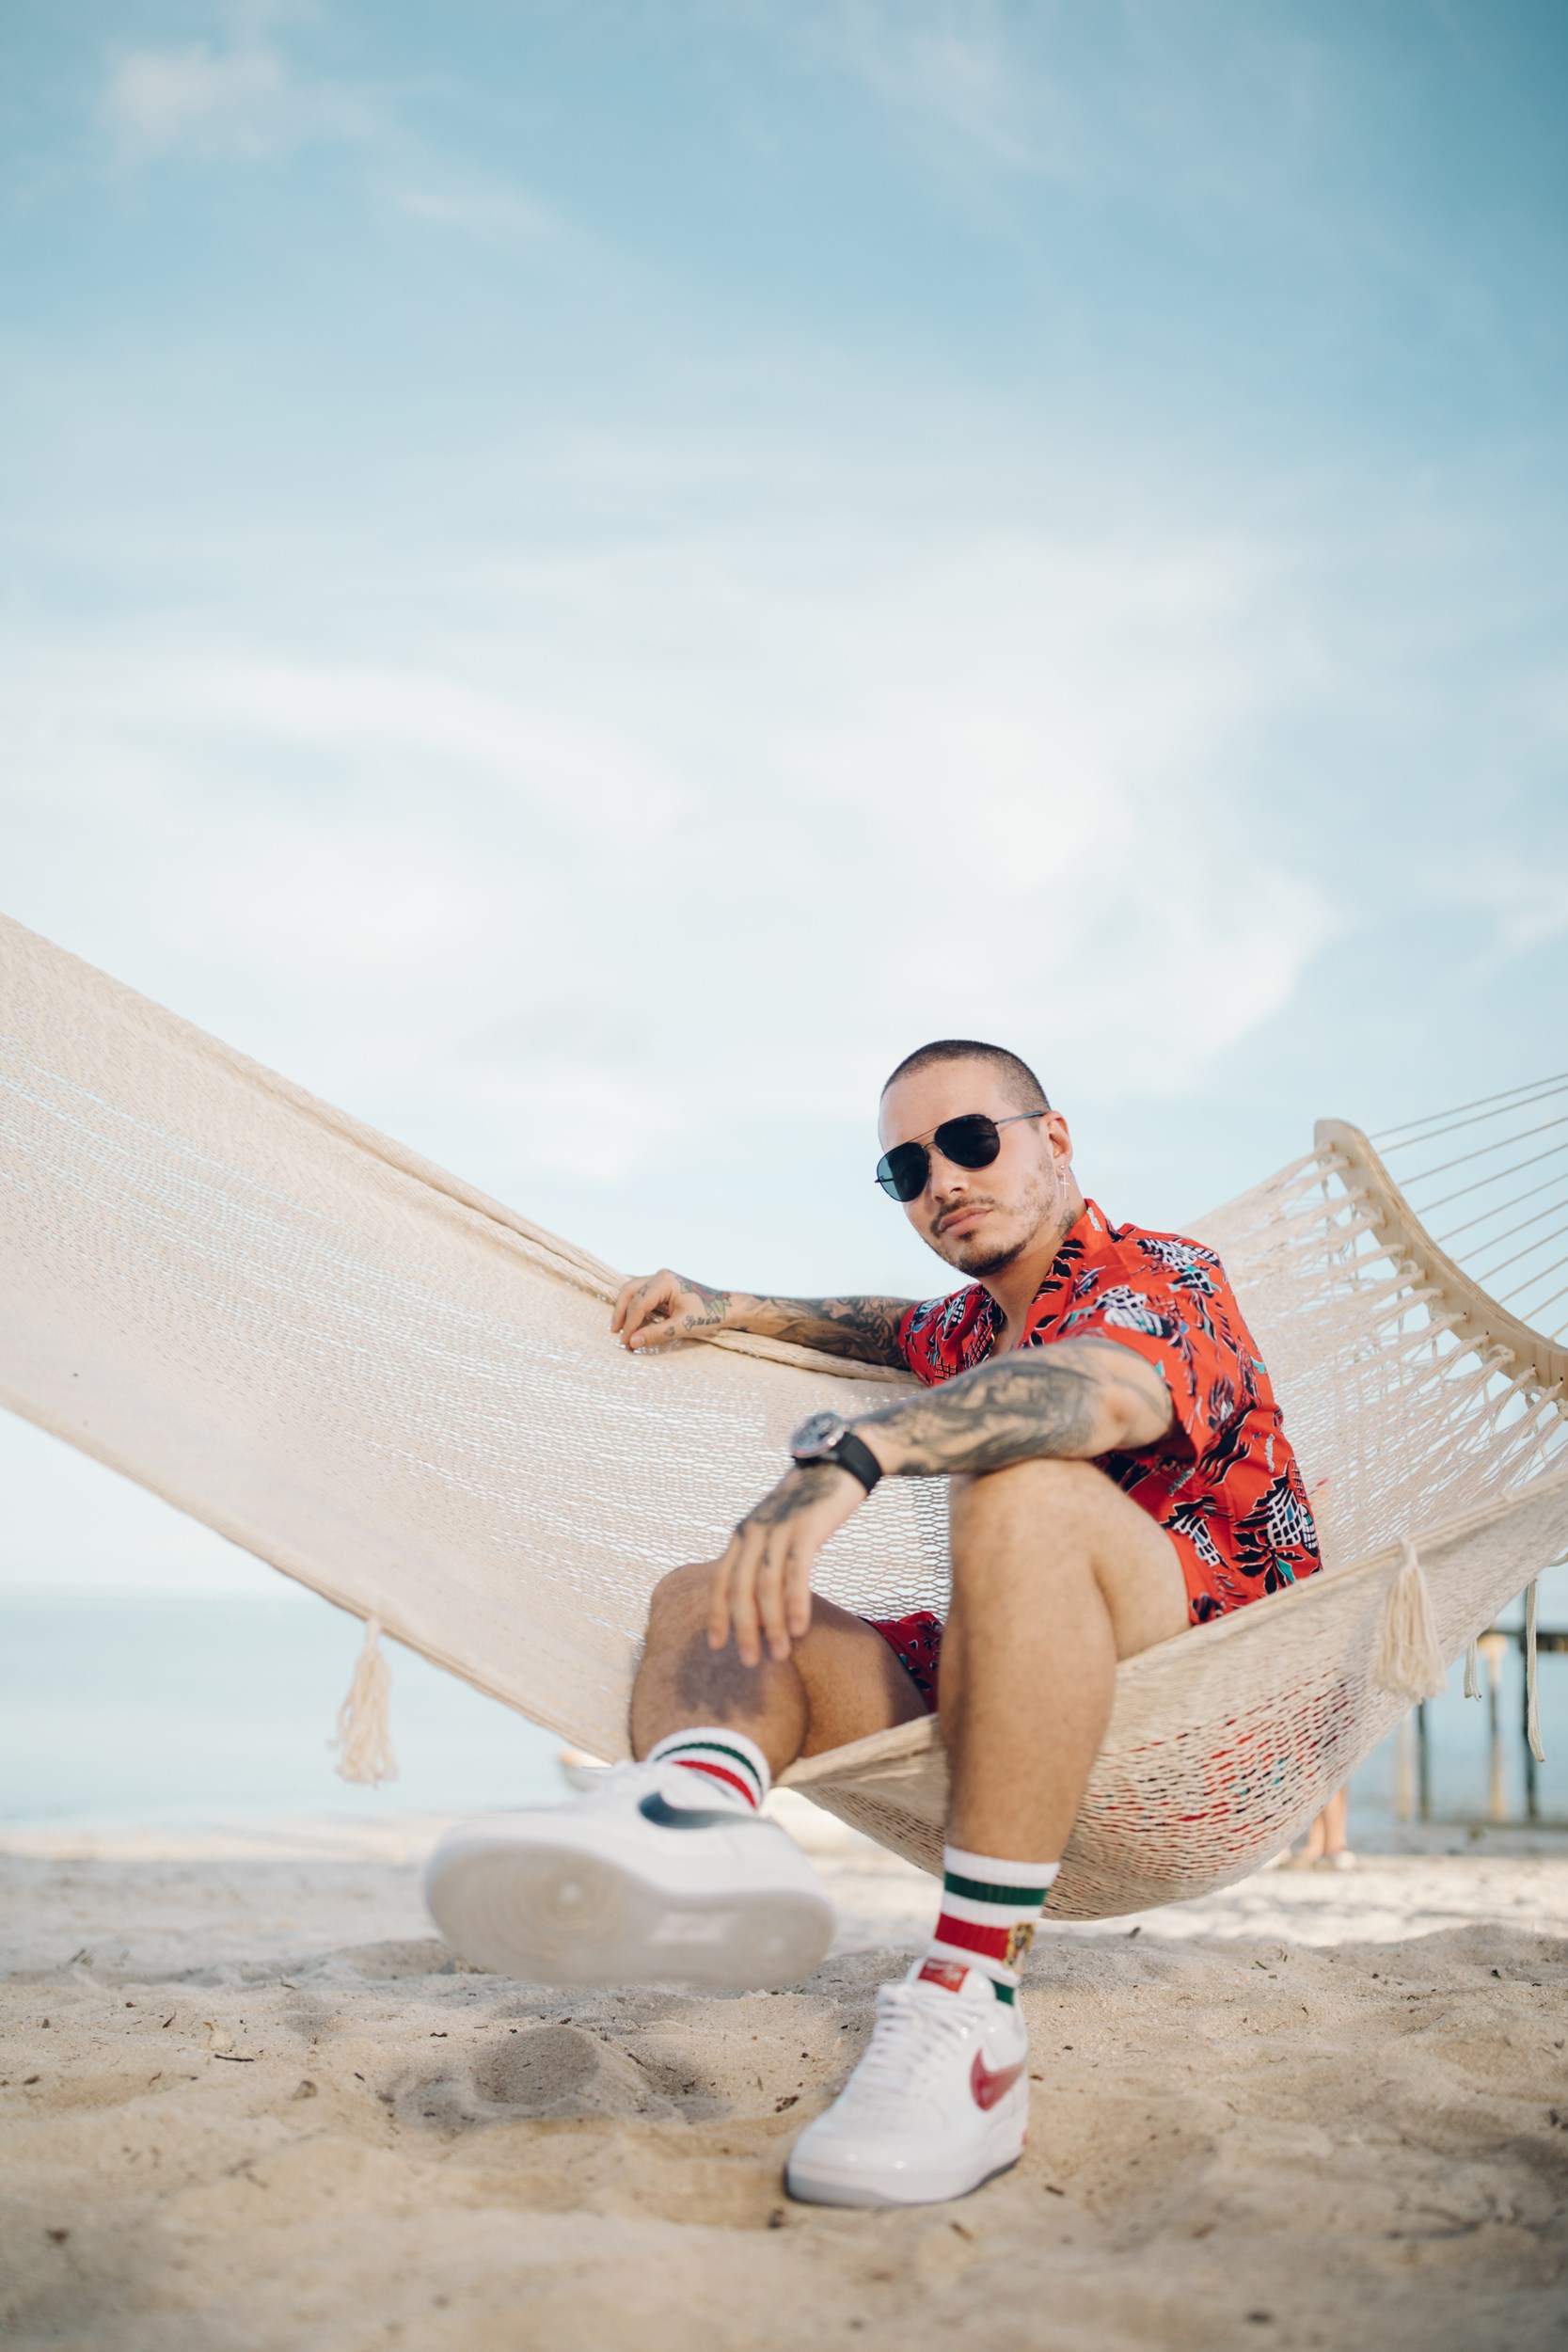 J Balvin: albums, songs, playlists